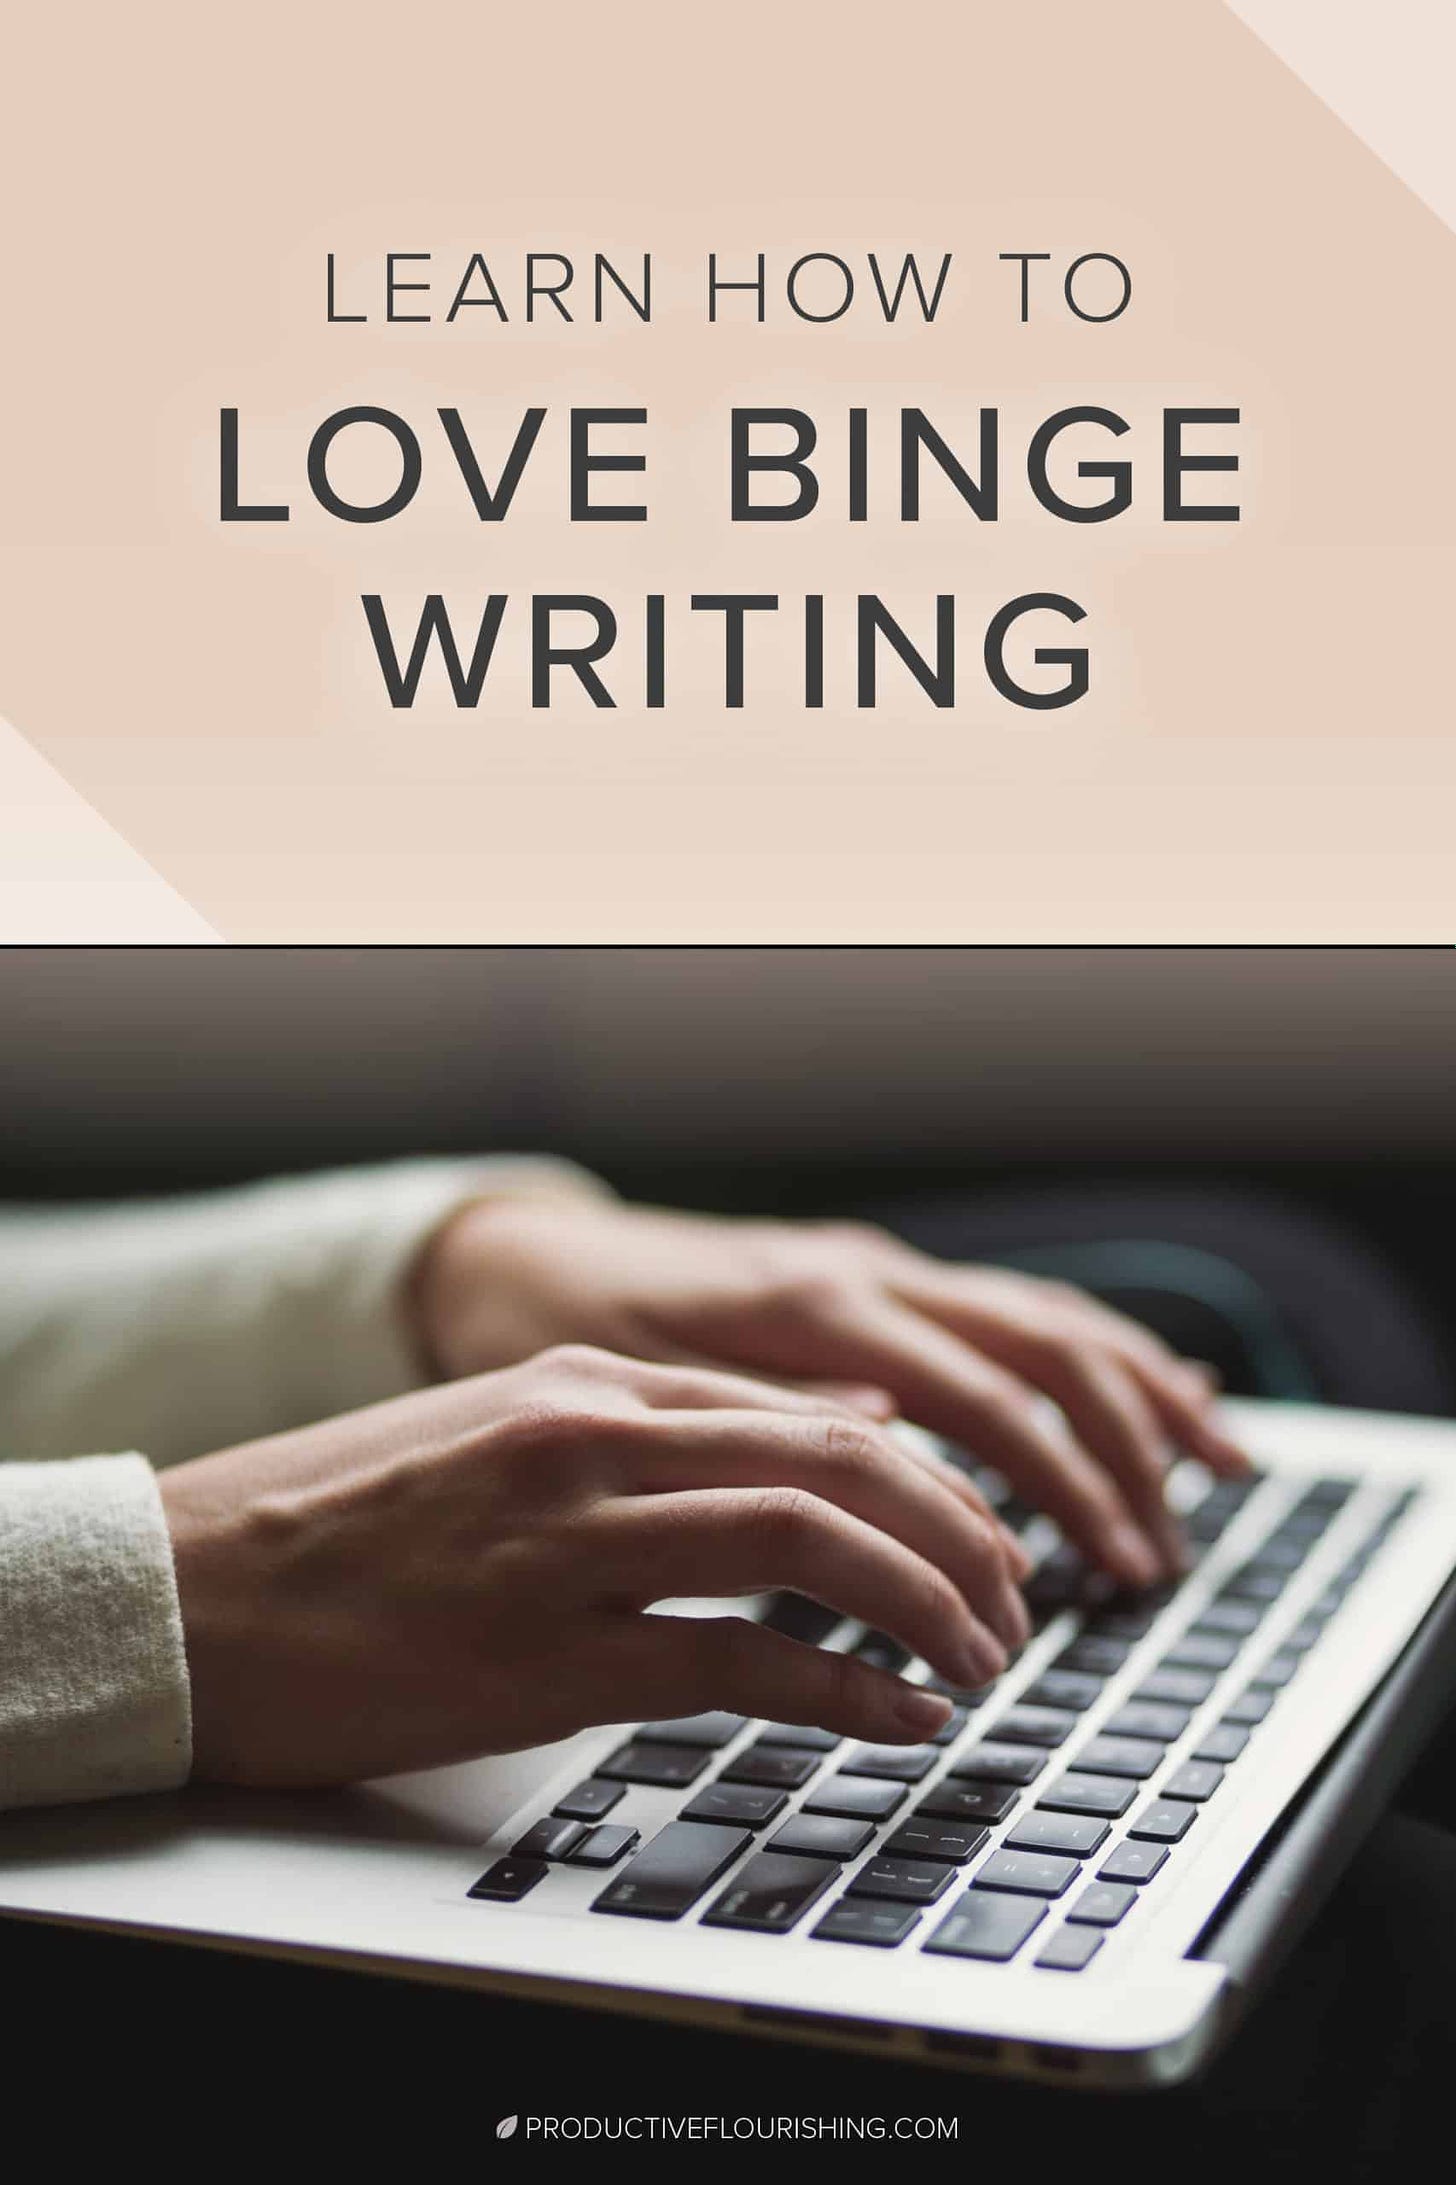 Learn How to Love Binge Writing. Working on that book over a few very focused weekends might be just as productive. In fact, without dragging the process out, you may find that your writing flows better and you’re less likely to forget things or repeat yourself. If the reality of your life is that it’s really not practical to write for an hour or more at a time, try writing in shorter sessions. #writingbinges #authorproductivity #productiveflourishing